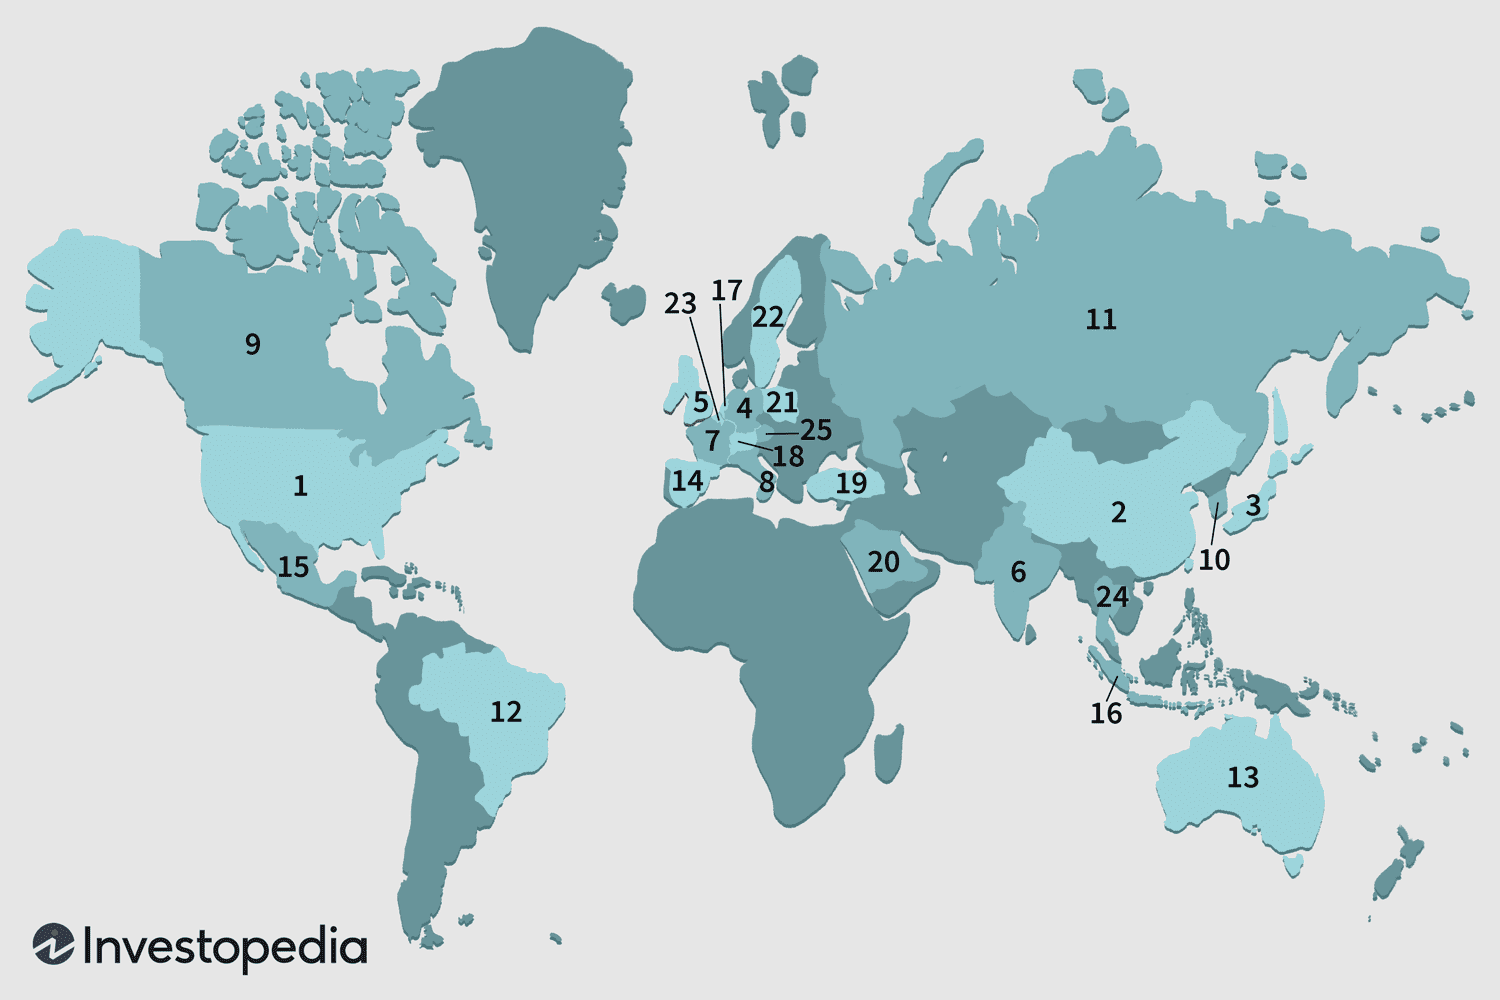 The Top 25 Economies in the World